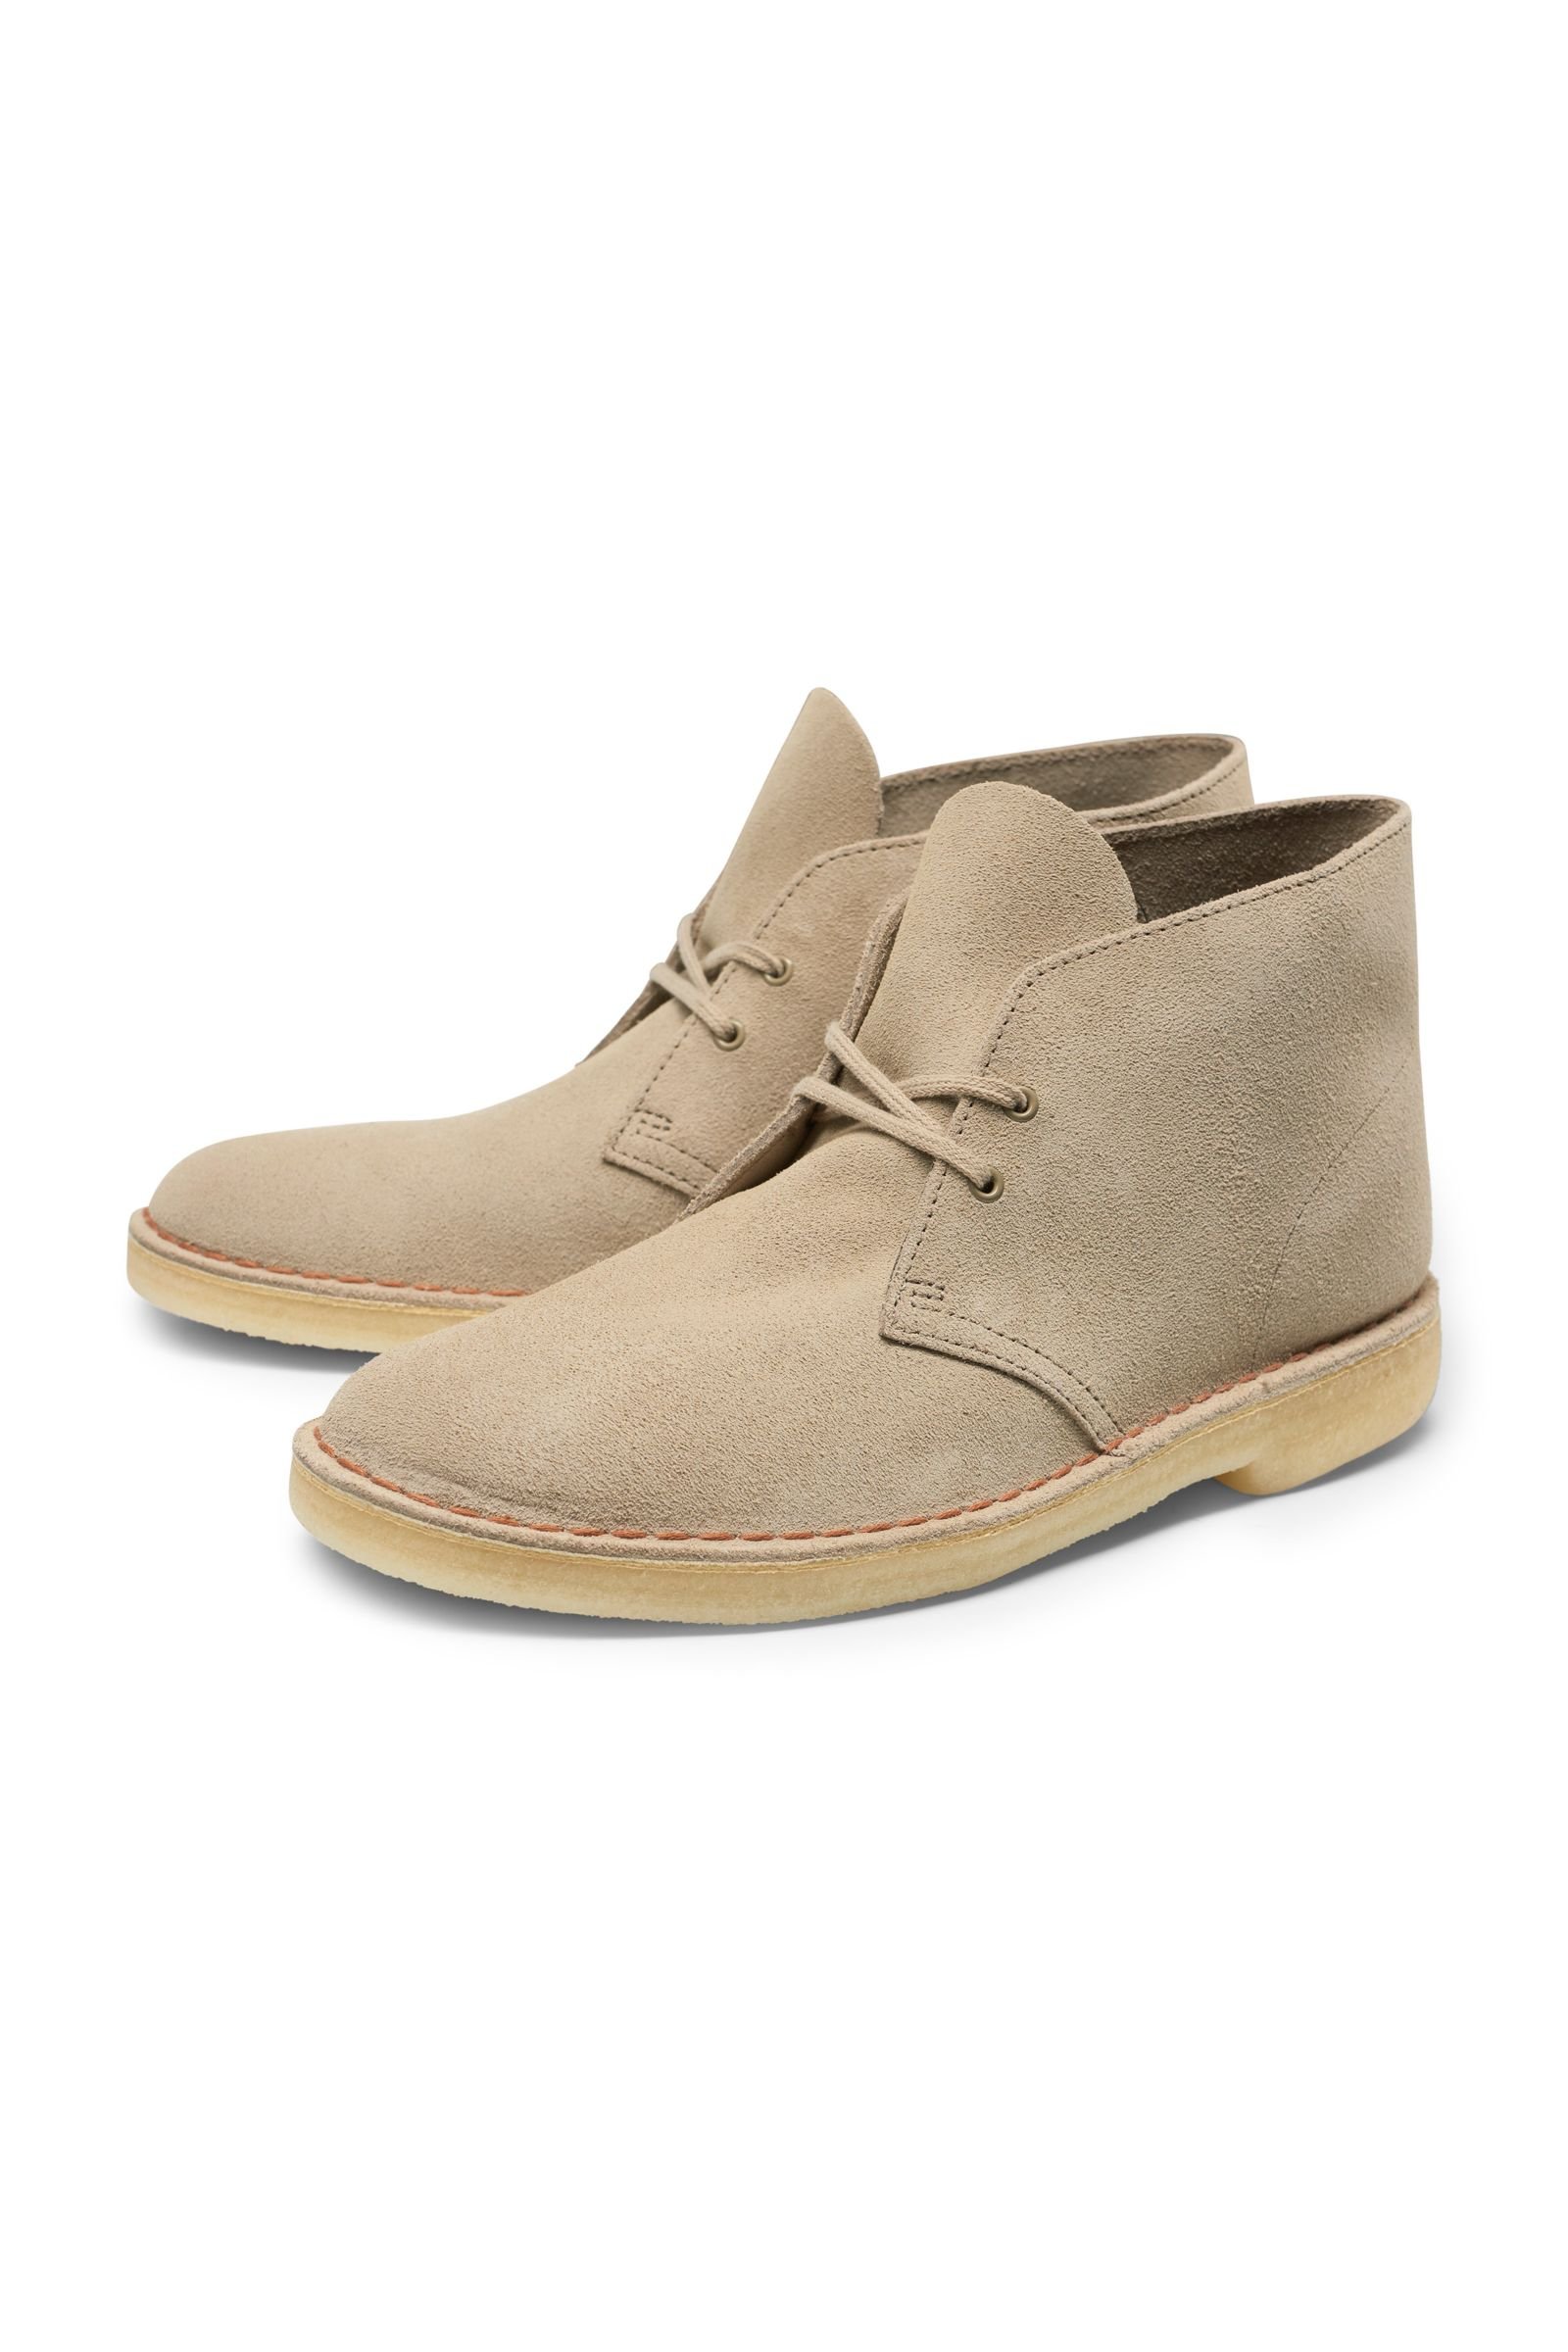 clarks tan boots